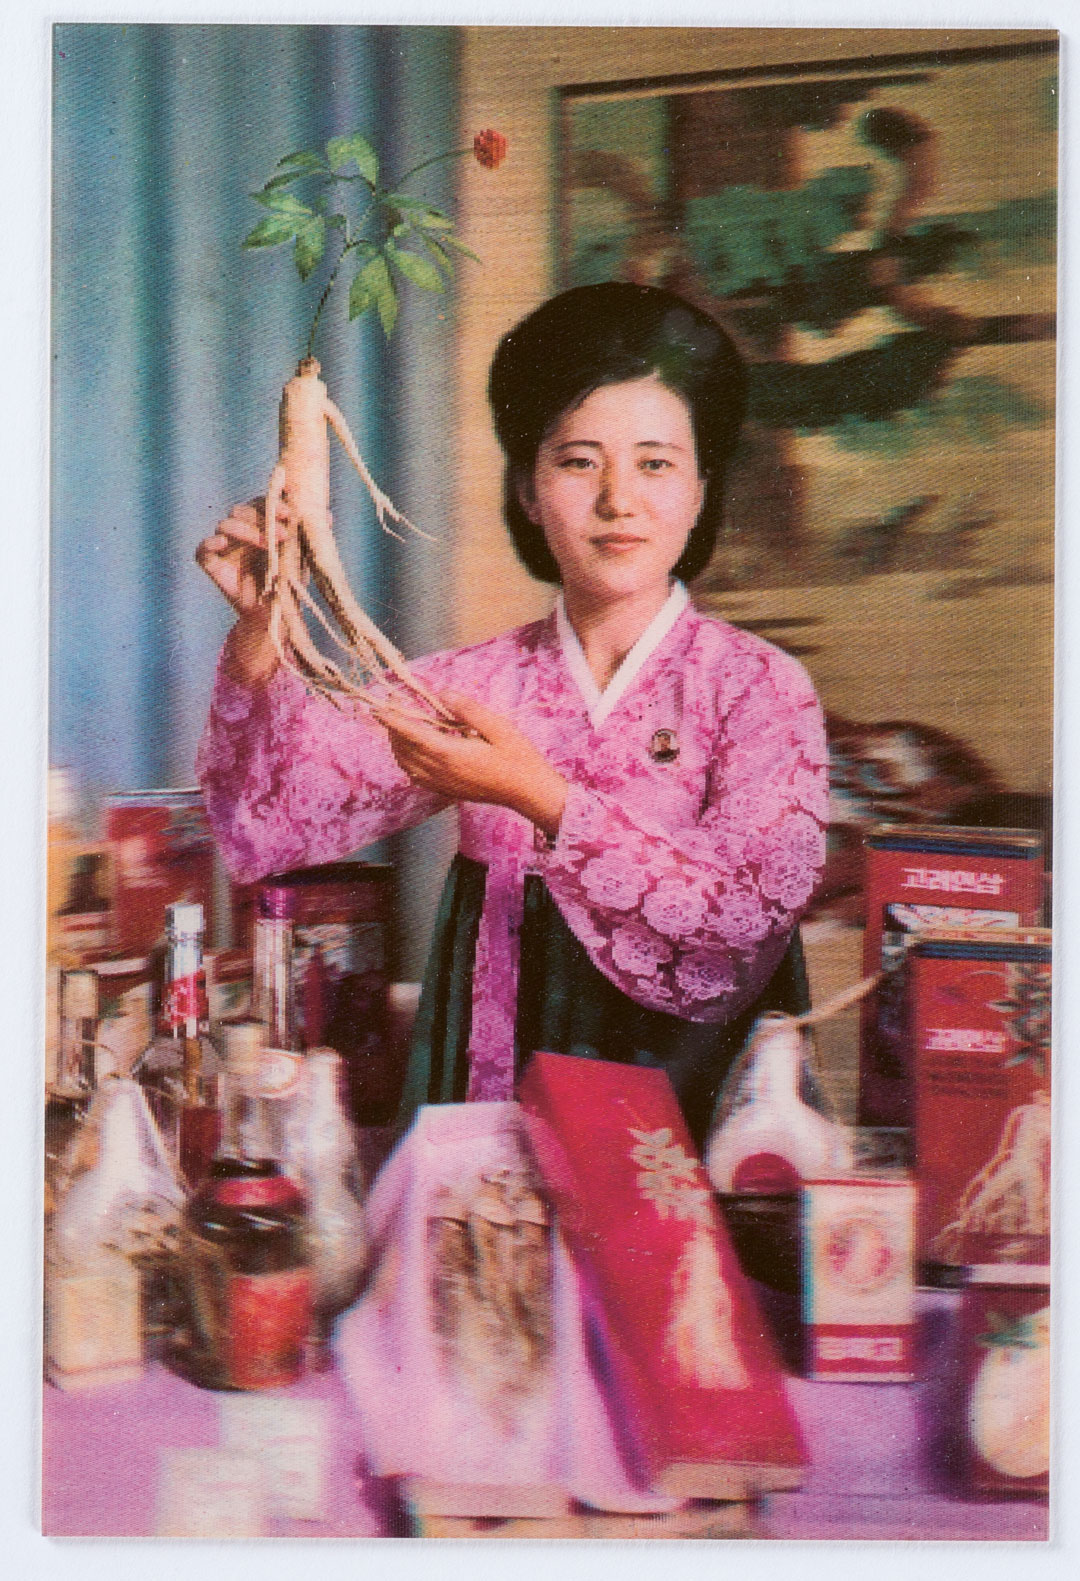 A 3D lenticular postcard extolling a plethora of beauty products aimed at women containing that most quintessential of North Korean panaceas – Kaesong Ginseng. From Made in North Korea